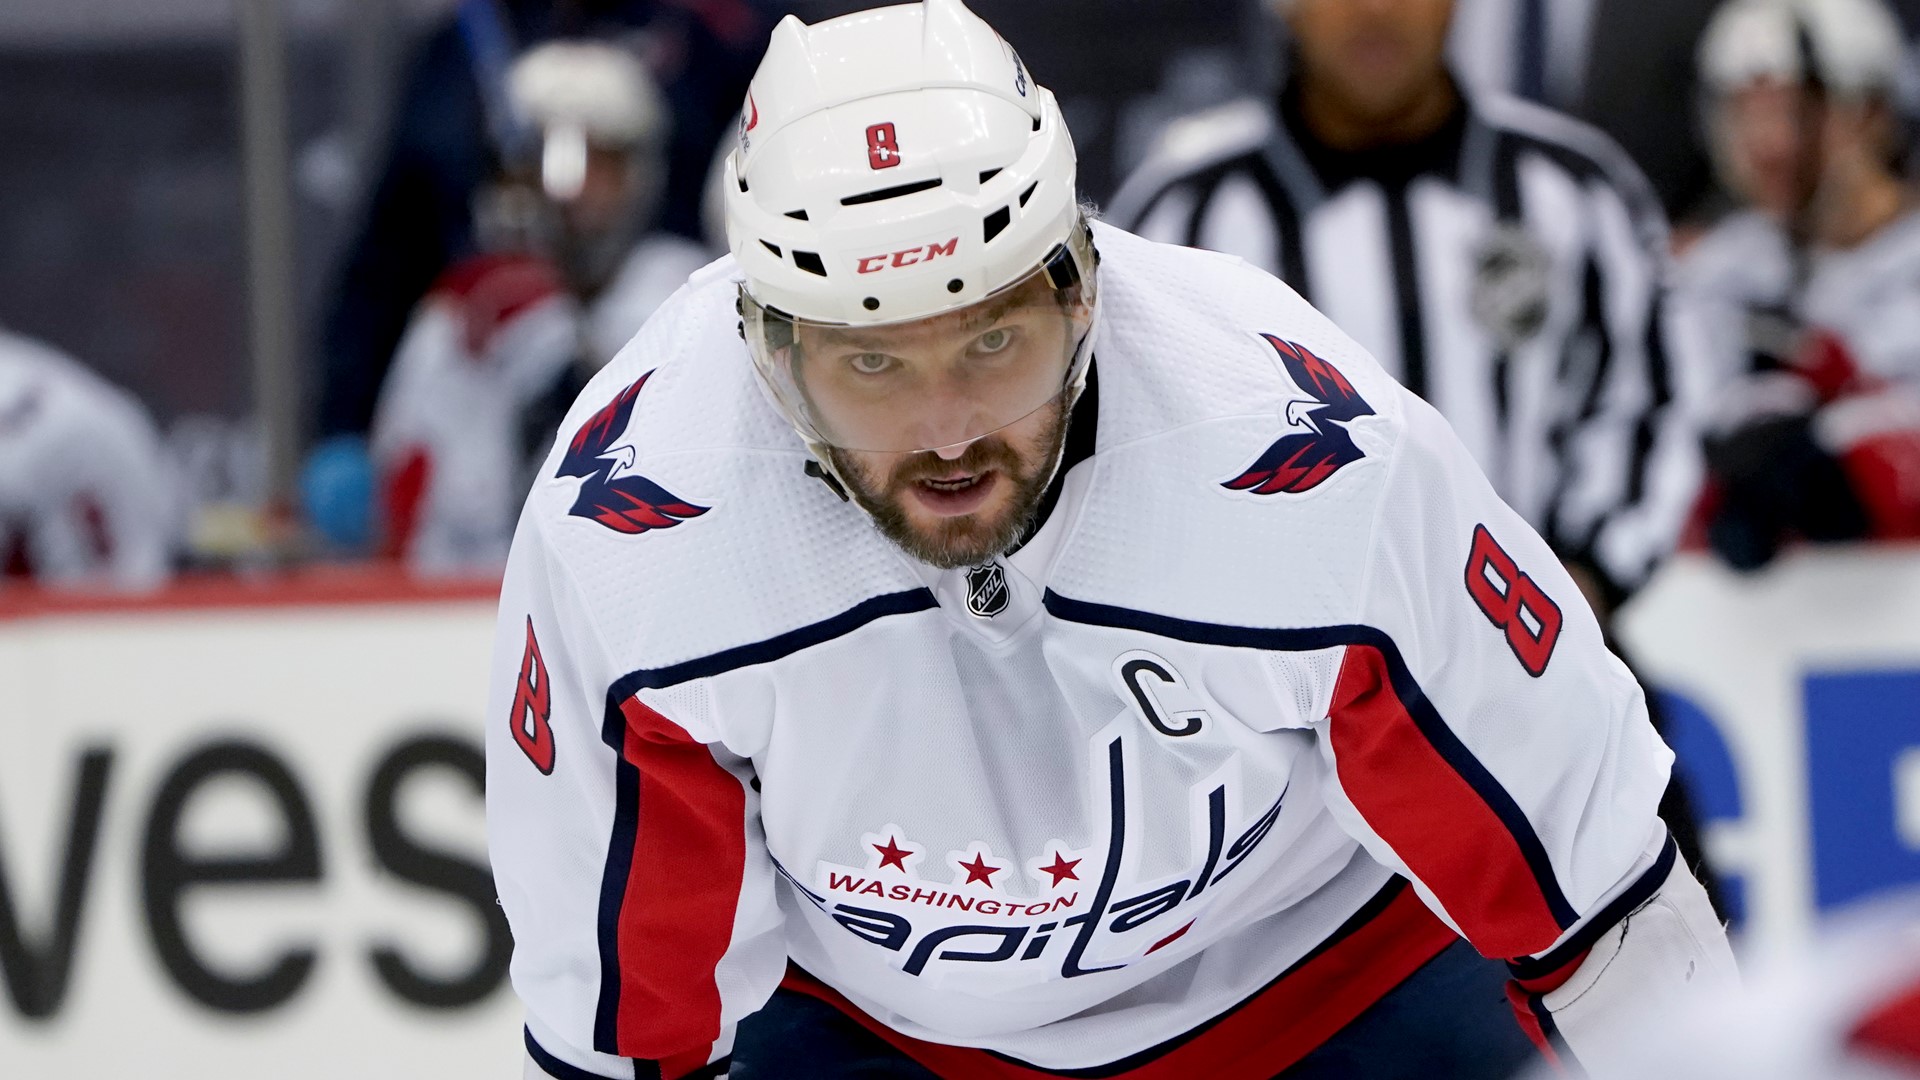 Caps Captain gets fined the maximum amount. But don't worry, it won't break the bank for him.